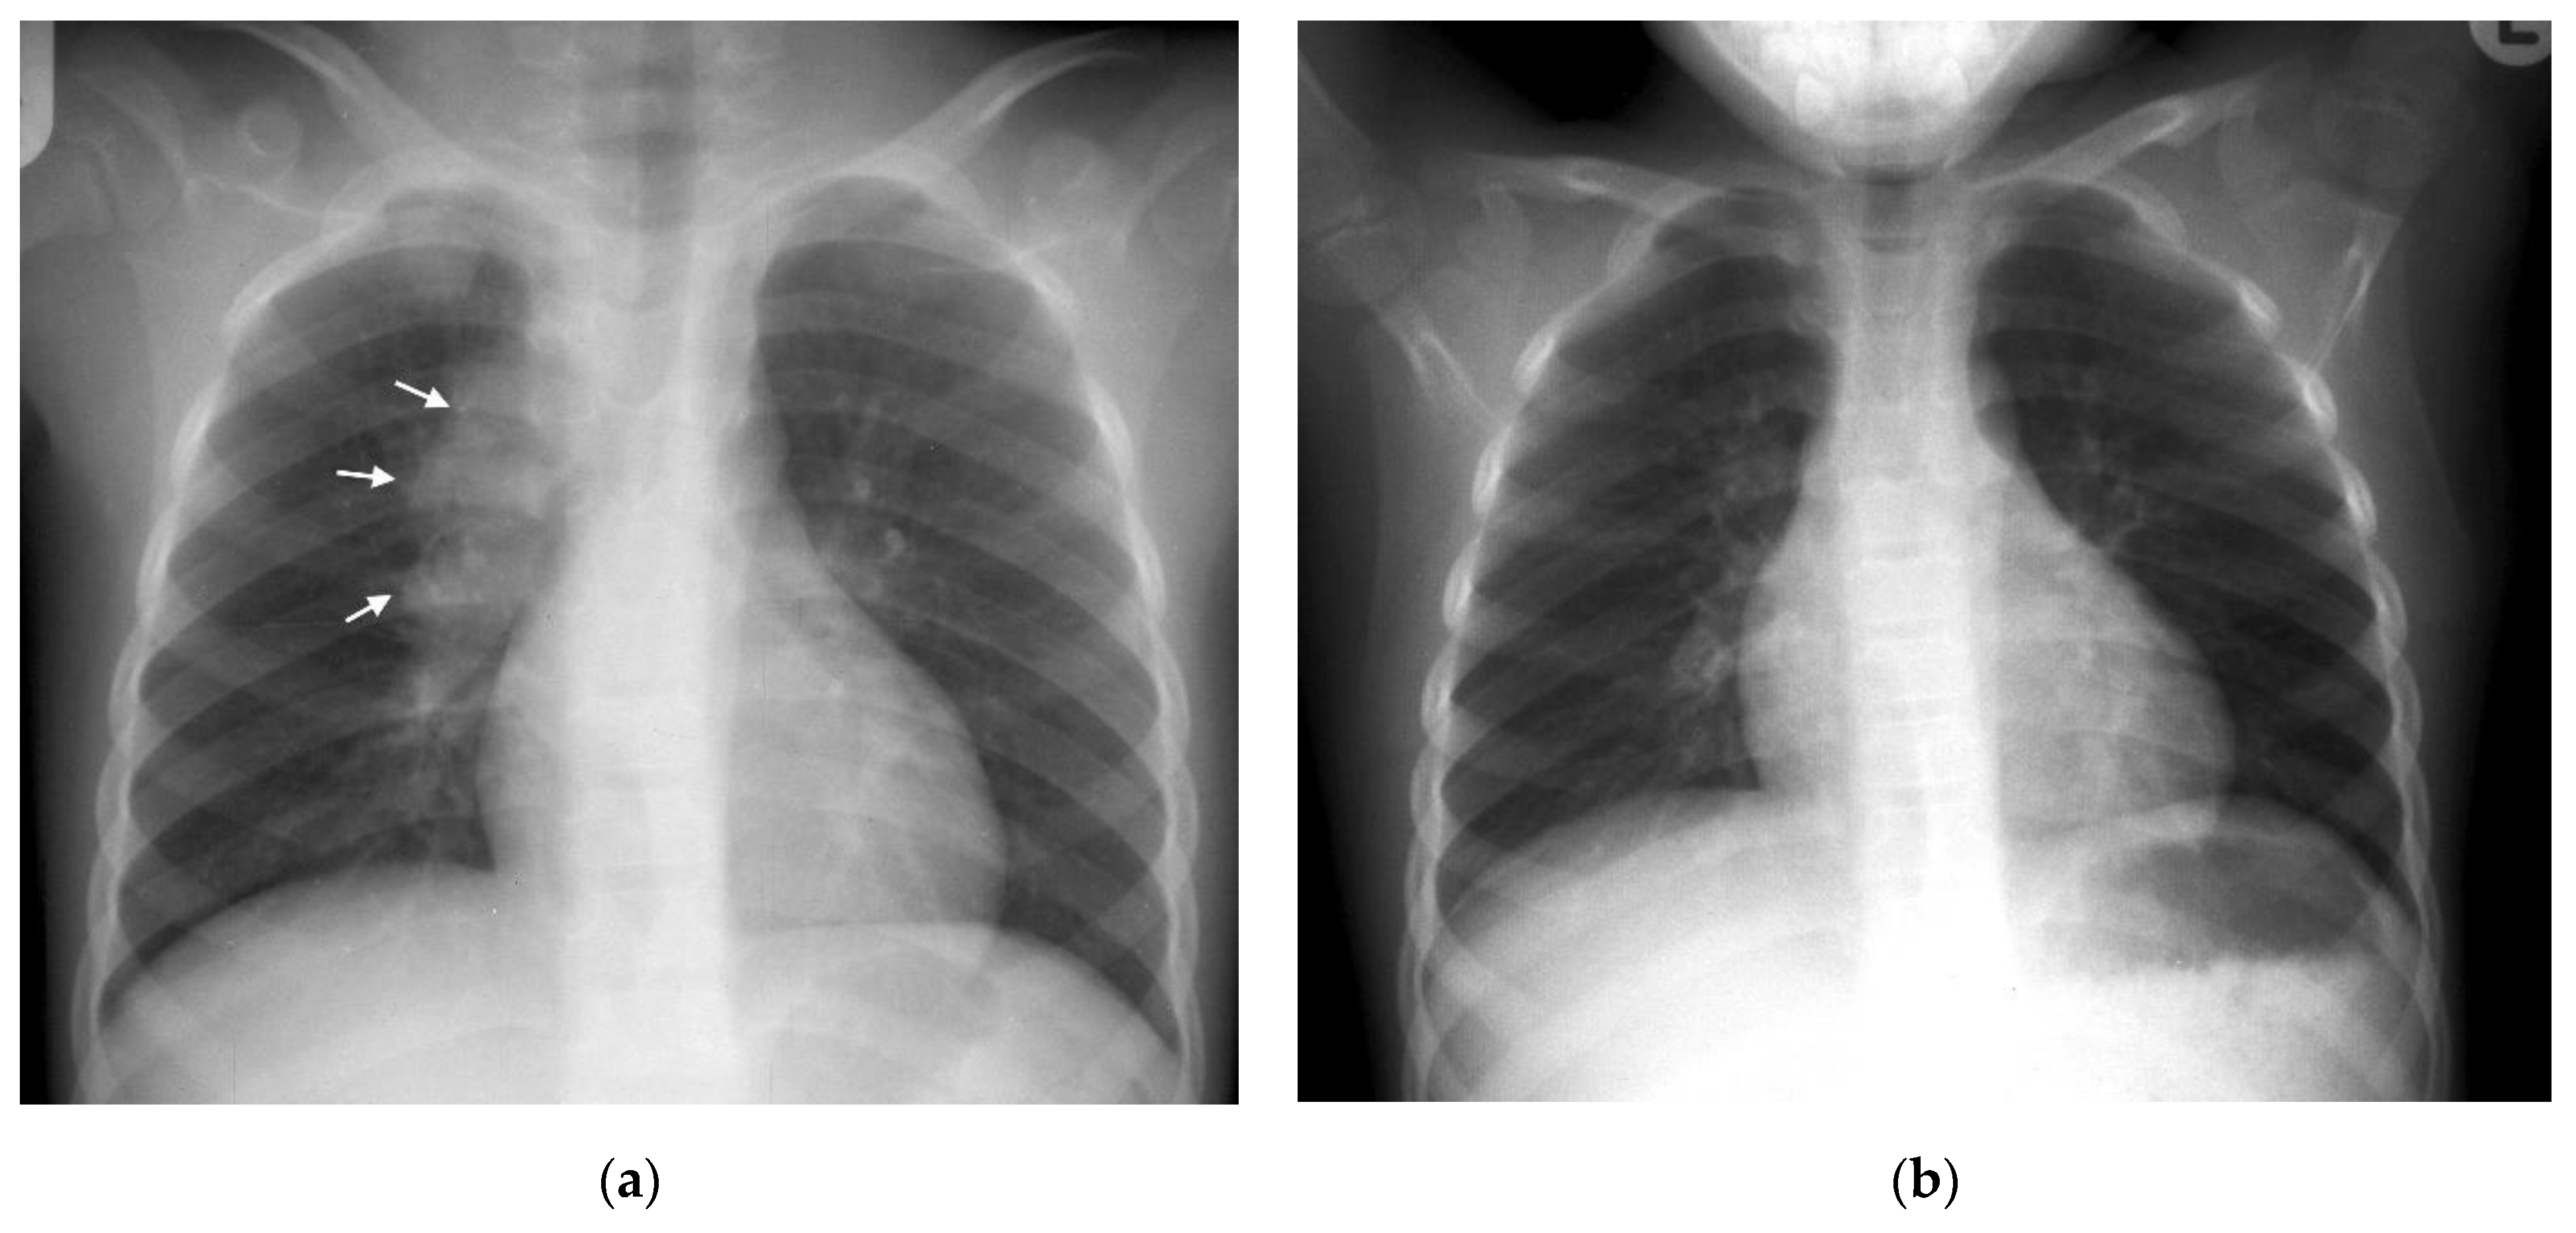 Pathogens | Free Full-Text | Chest Imaging for Pulmonary TB&mdash;An Update